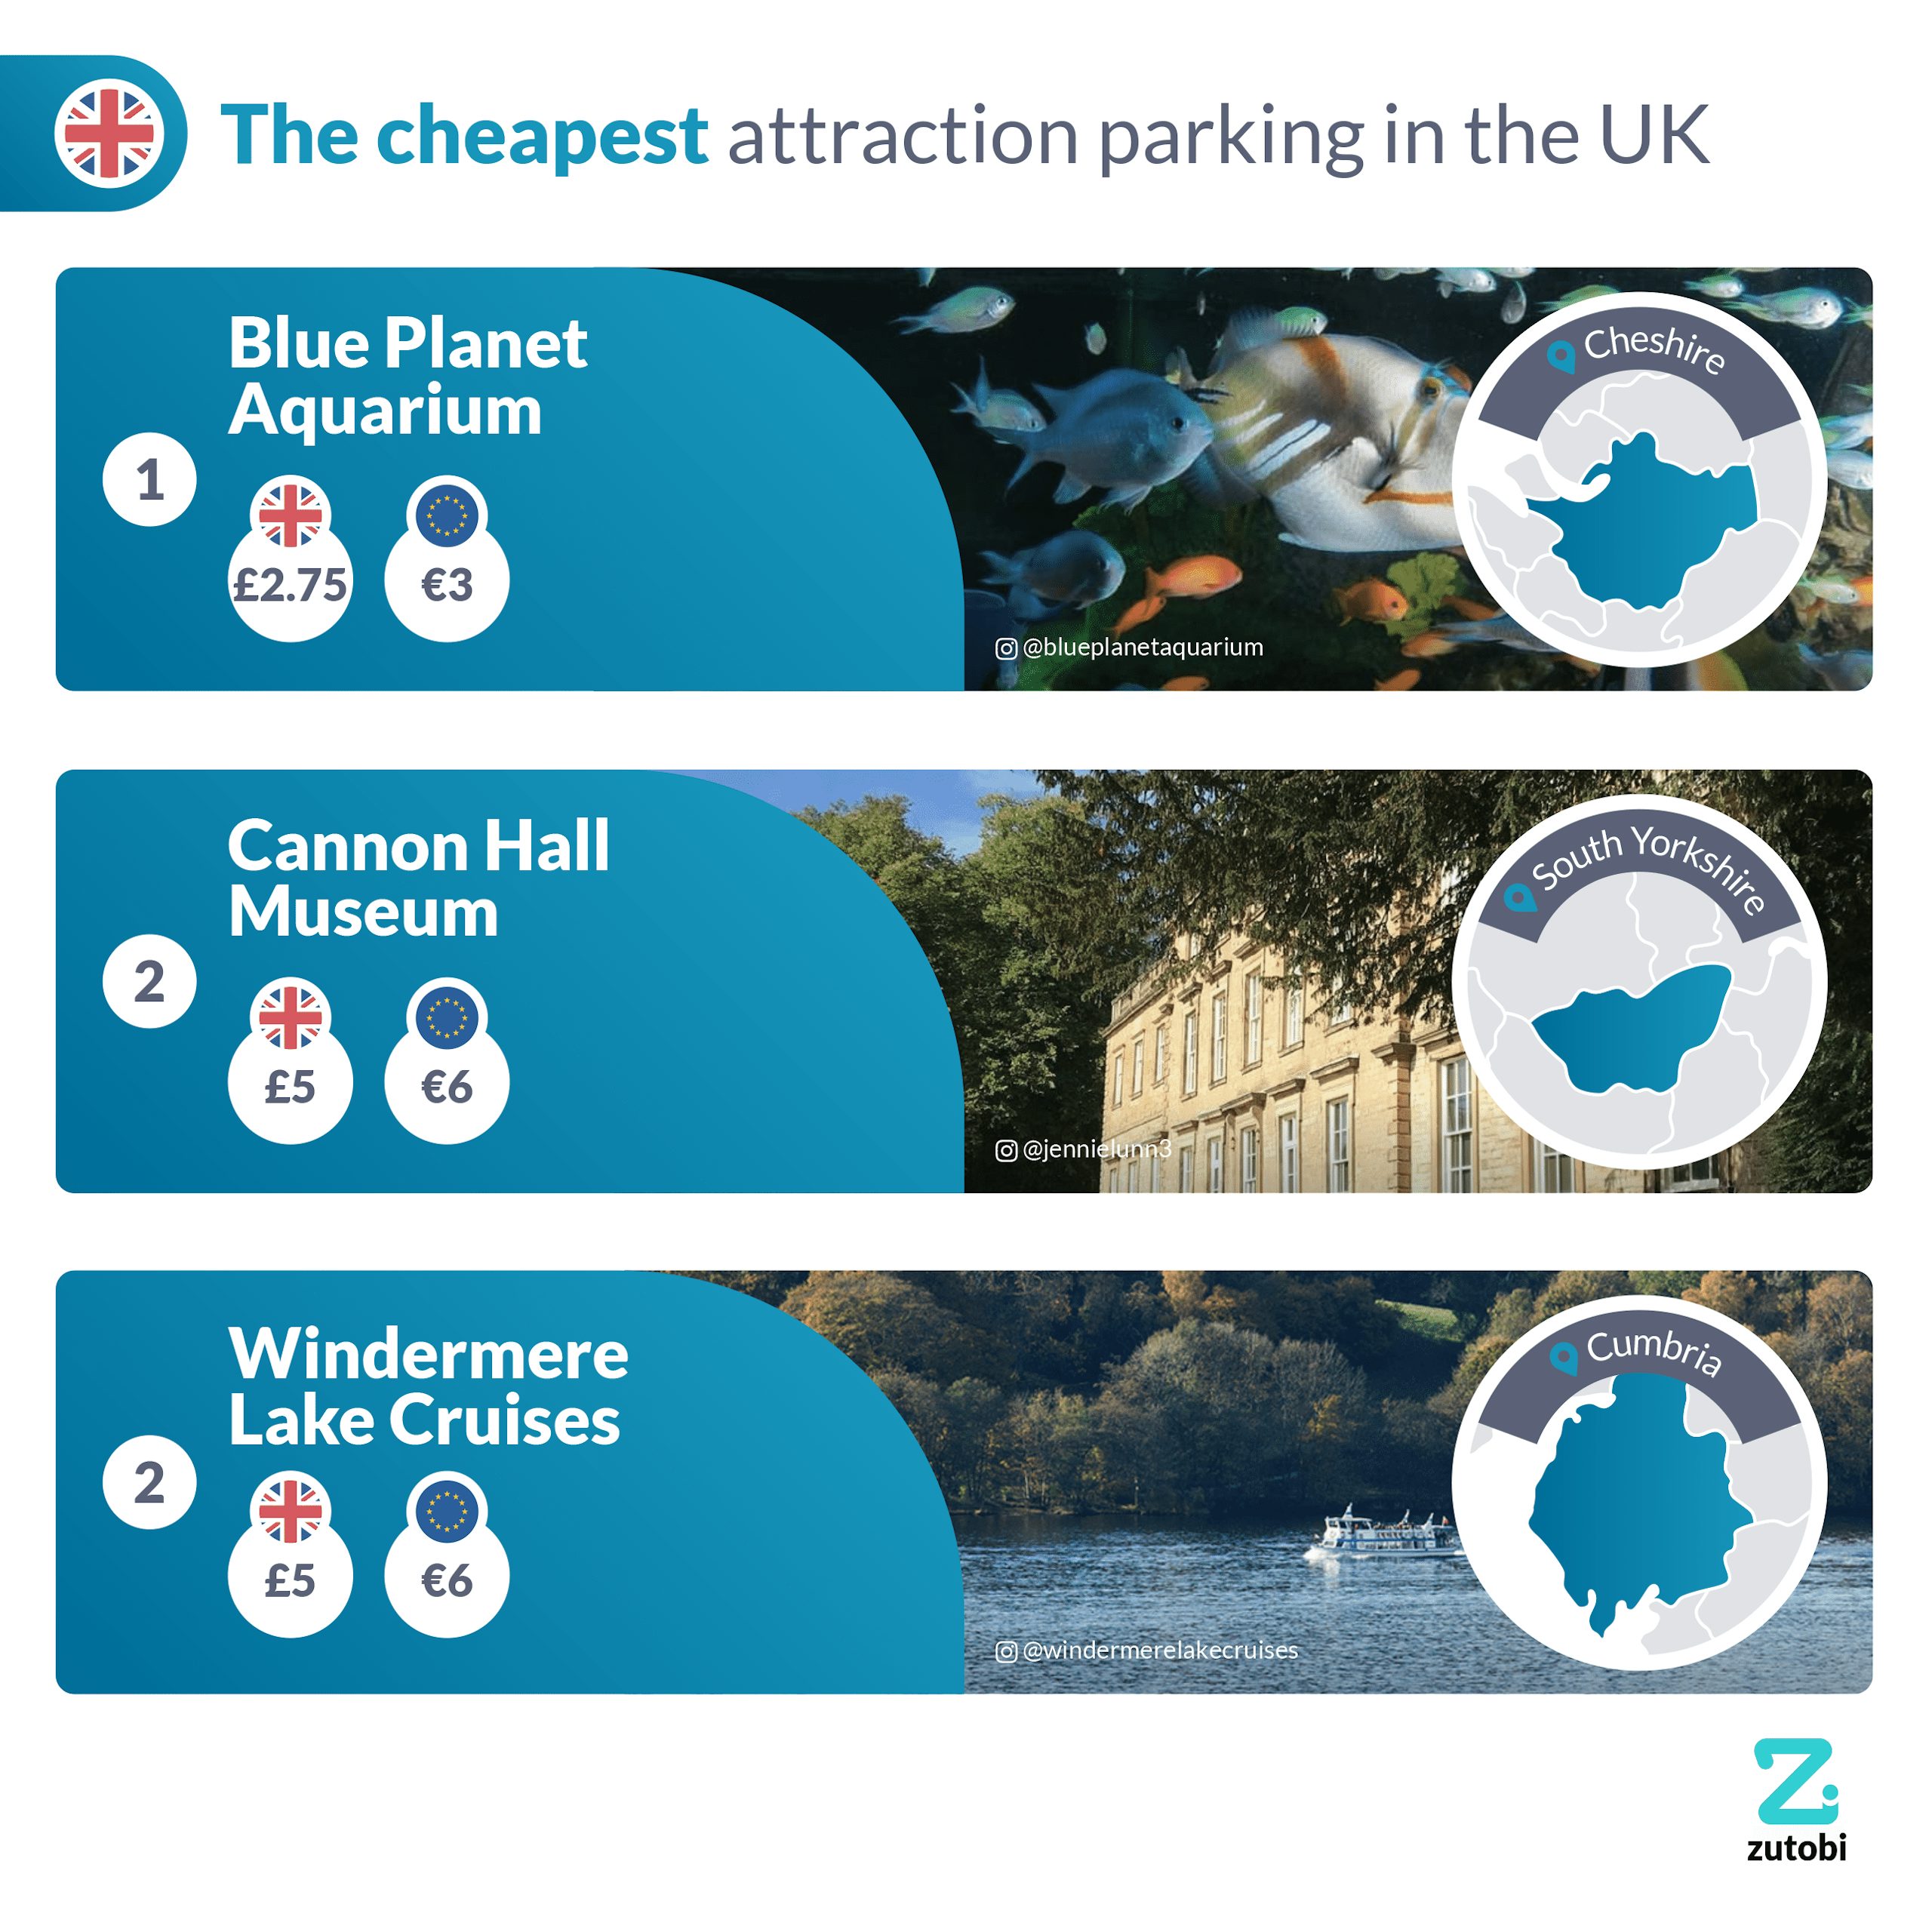 The cheapest attraction parking in the UK